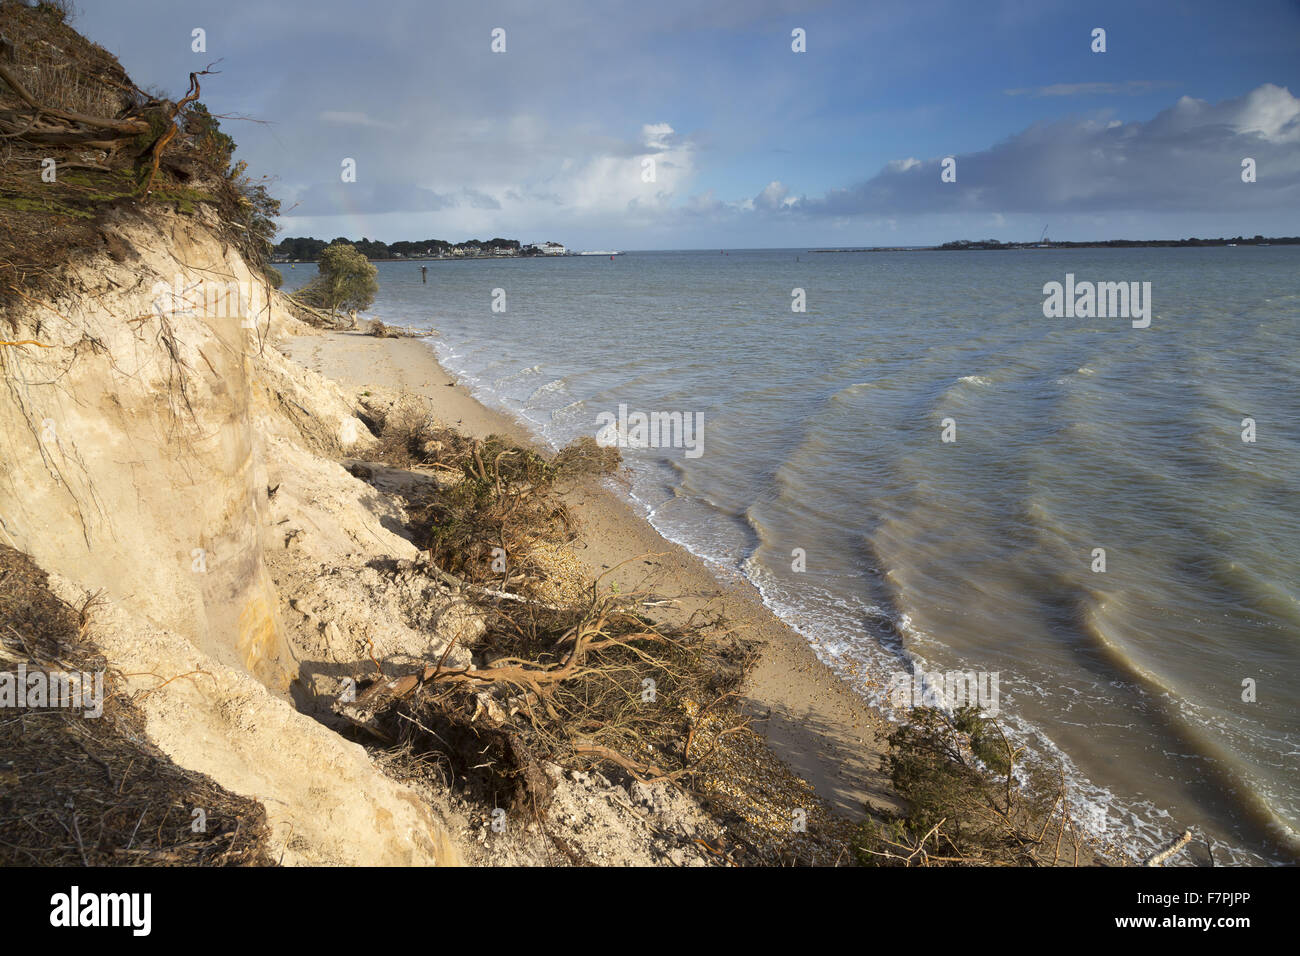 View of the storm-damaged cliffs and beach on the South Shore of Brownsea Island, Dorset, pictured here in February 2014. Extreme weather in January and February of that year resulted in cliff falls and rapid erosion of the coastline. Stock Photo